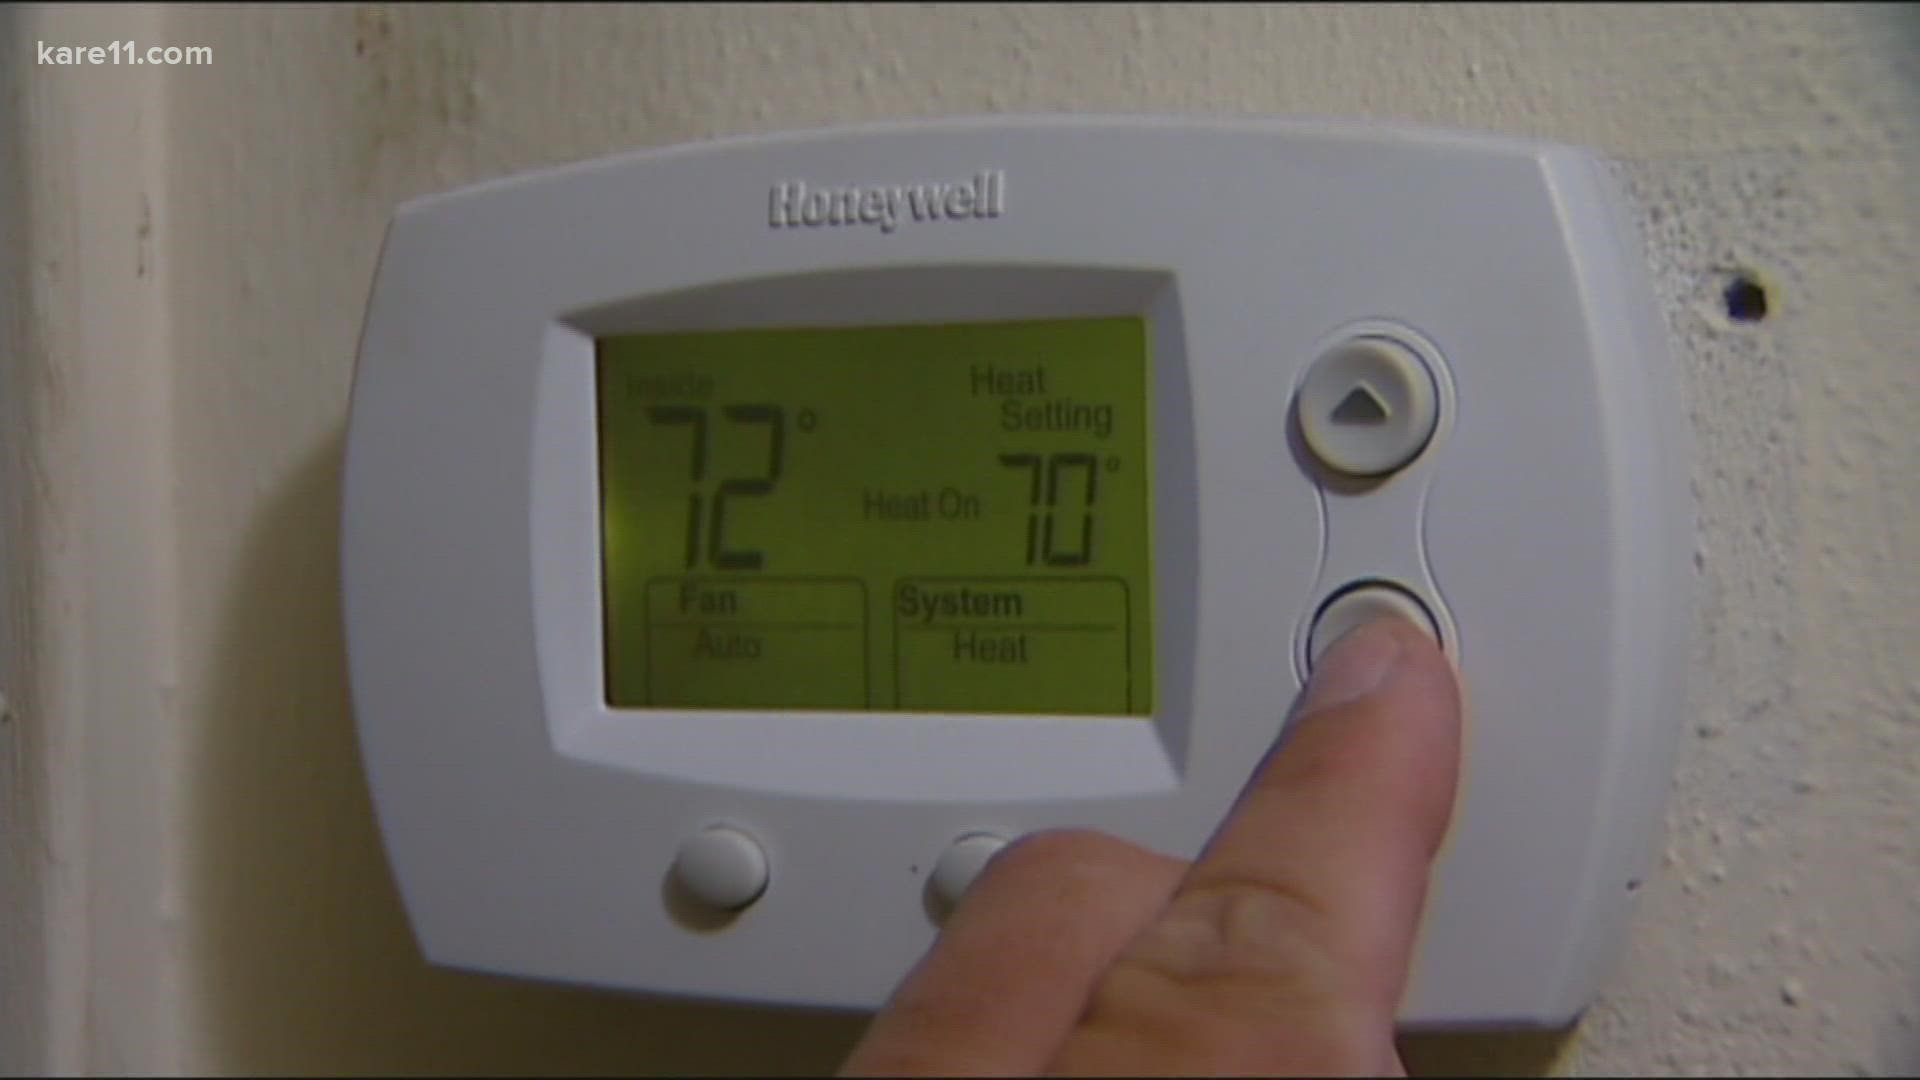 The Energy Information Administration says the average U.S. household will spend 30% to 50% more on heating this winter.